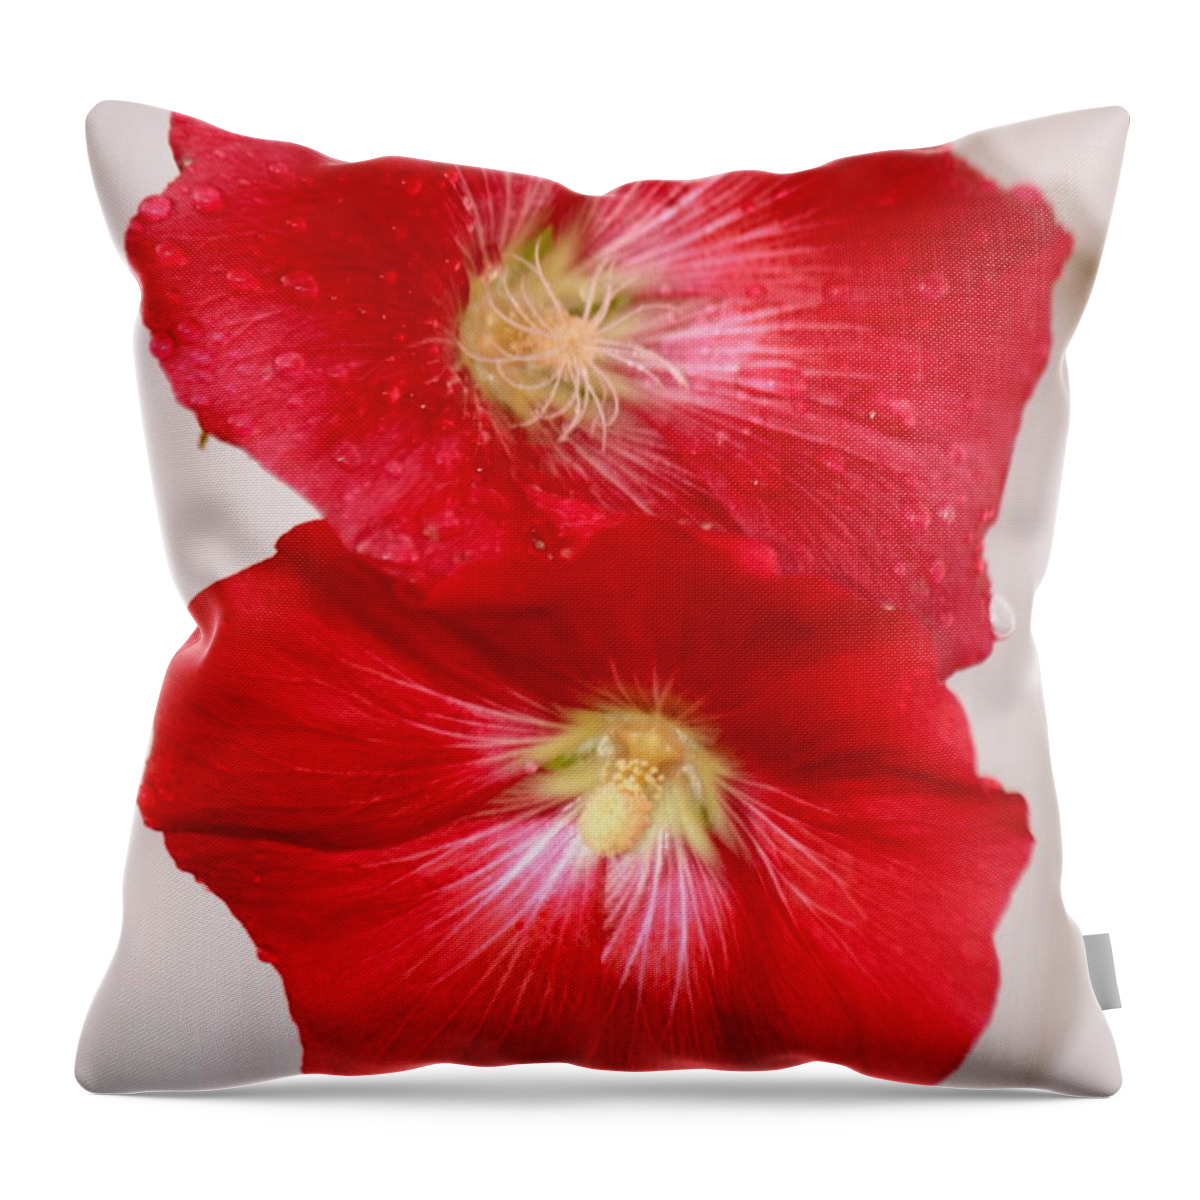 Red Hollyhocks Throw Pillow featuring the photograph Red Hollyhocks by Donna Walsh